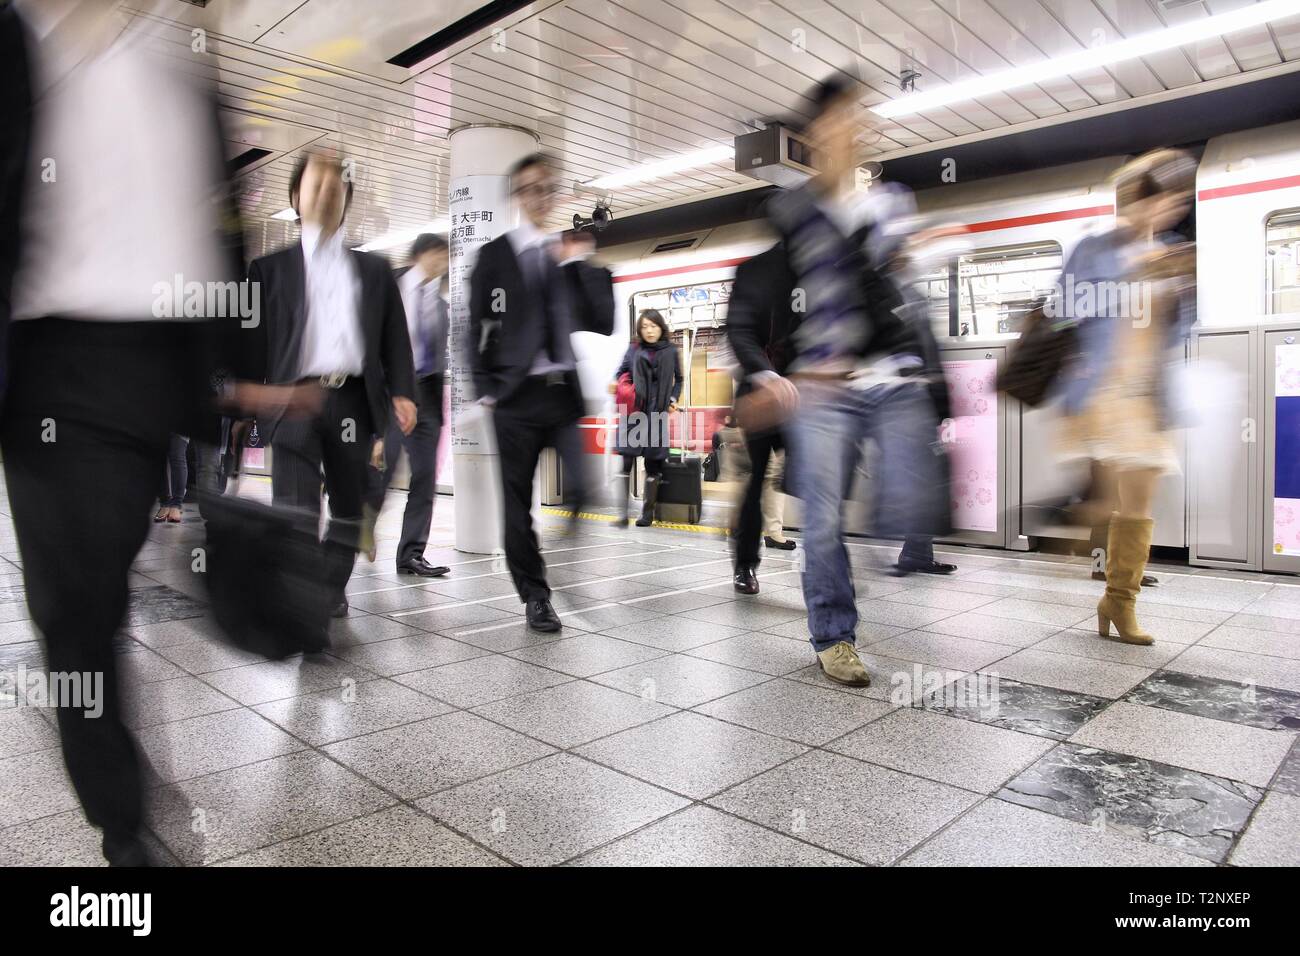 TOKYO, JAPAN - APRIL 13: People exit Tokyo Metro. With more than 3.1 billion annual passenger rides, Tokyo subway system is the busiest worldwide. Stock Photo